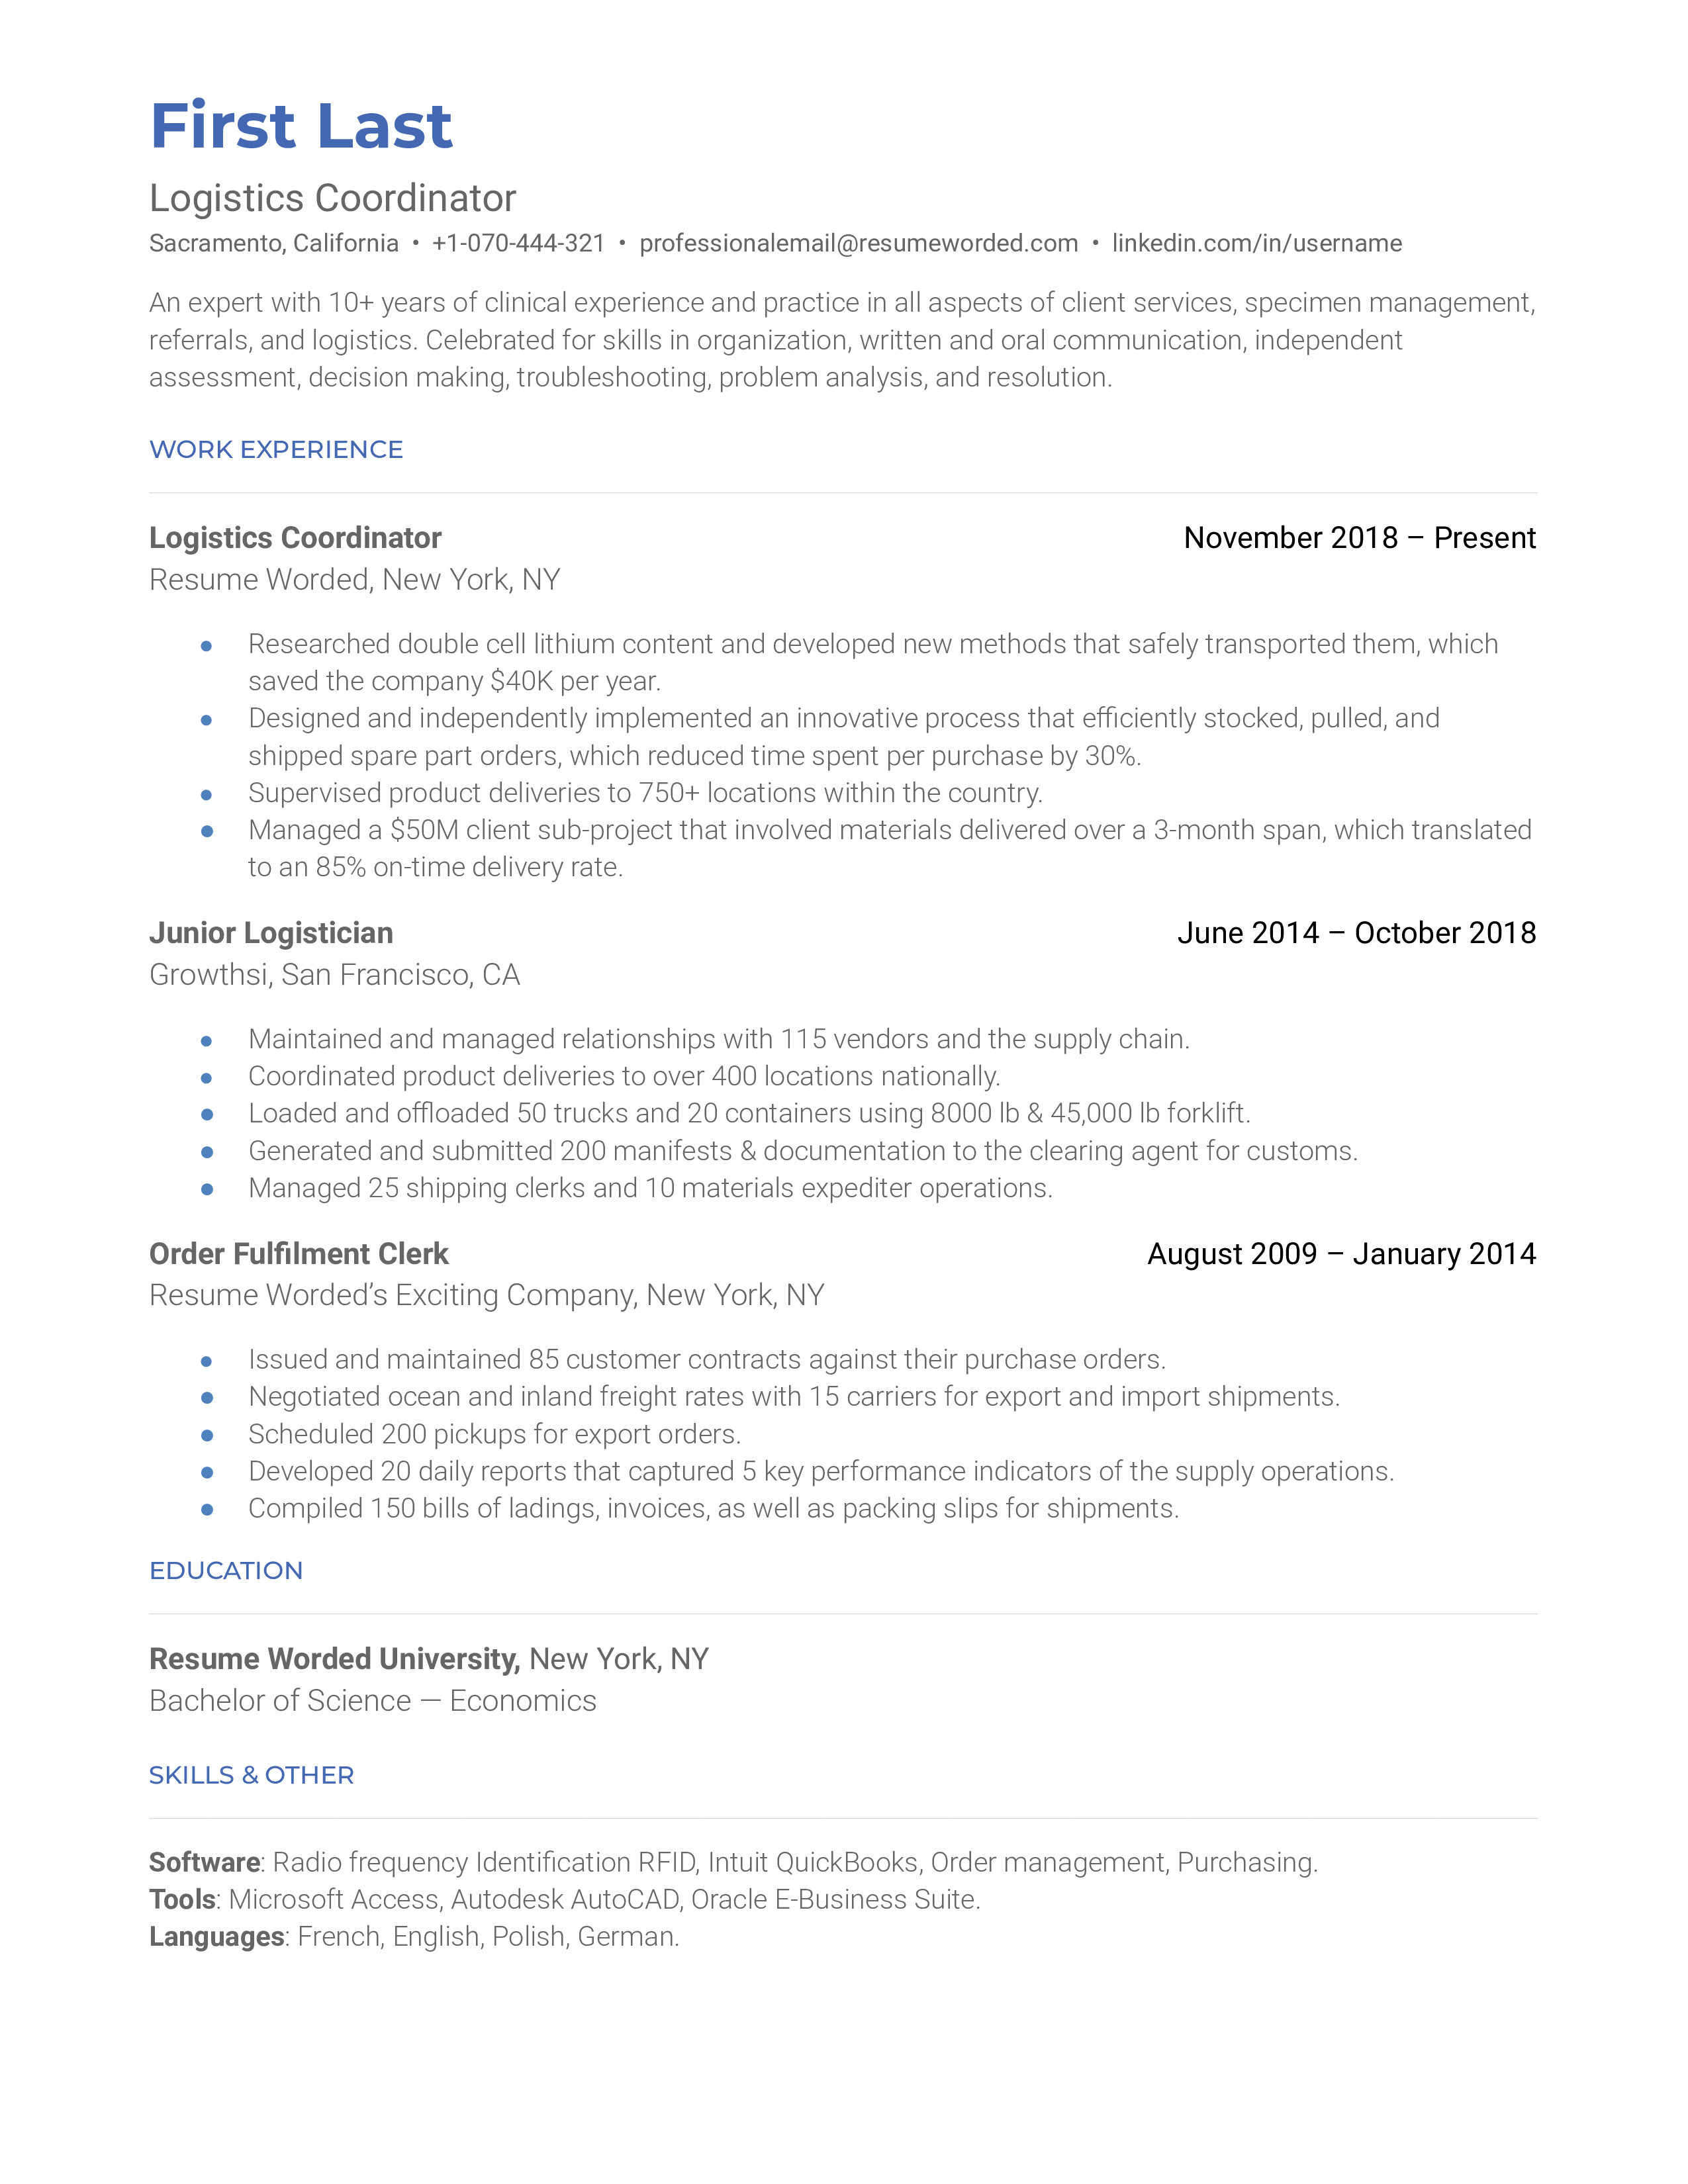 A logistics coordinator resume highlighting achievements and value proposition